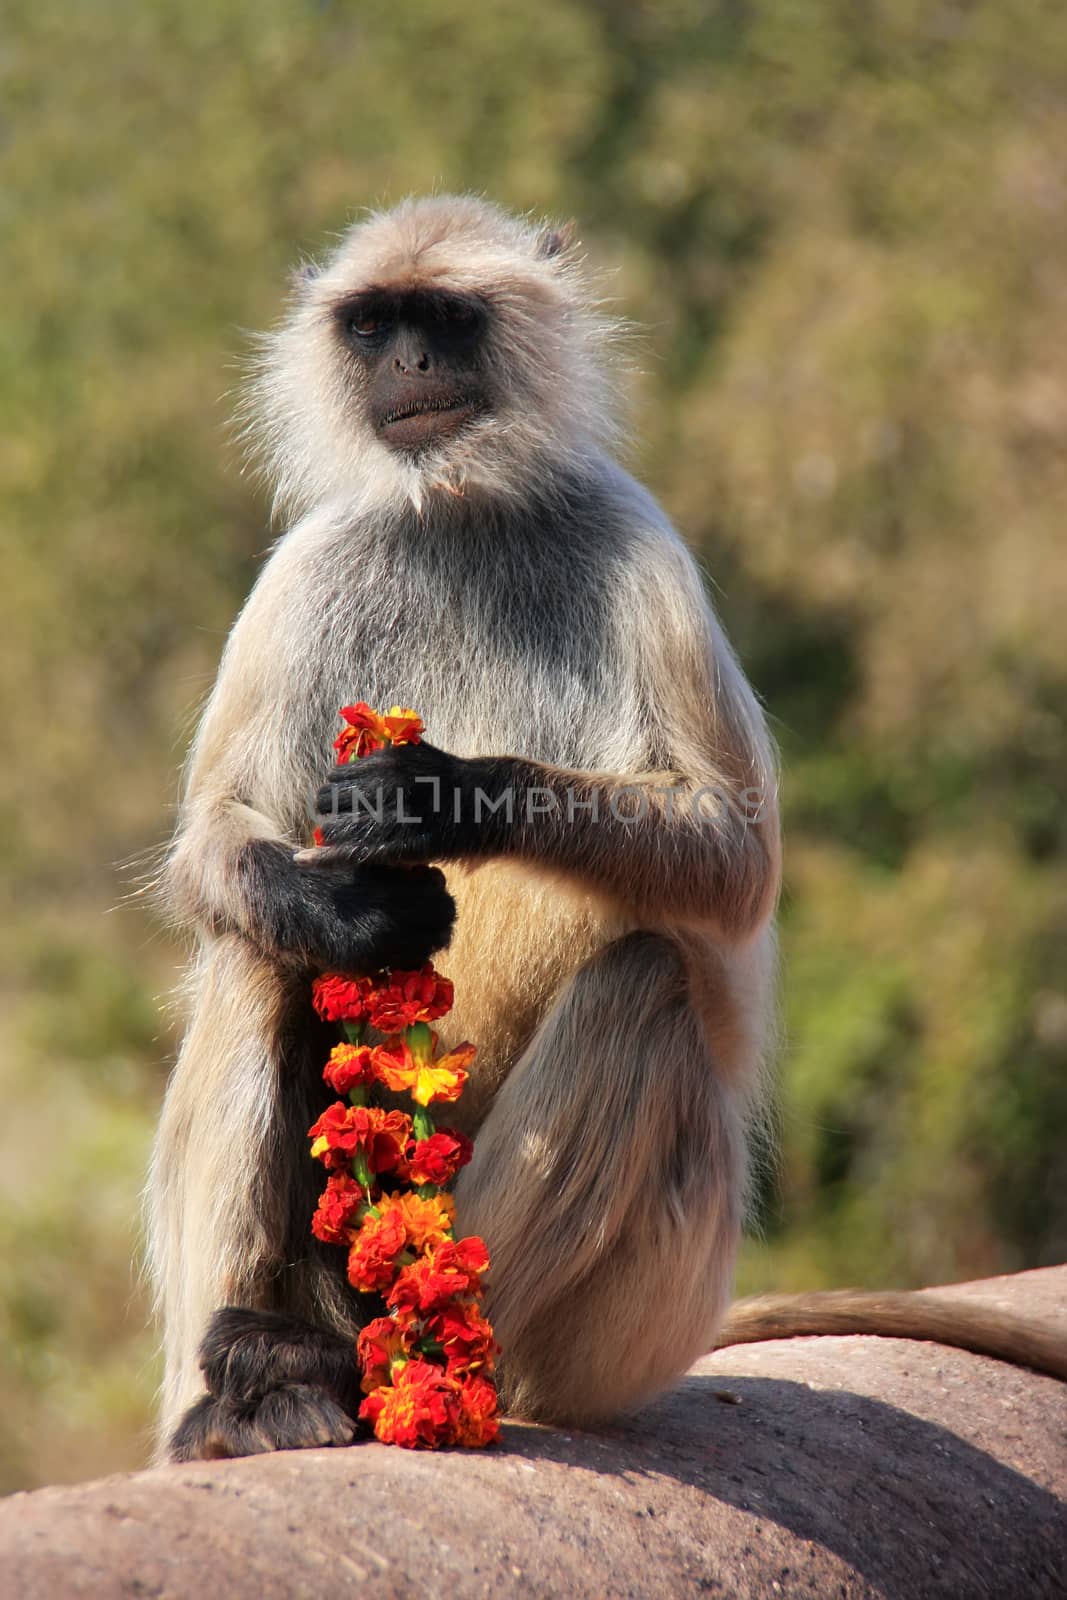 Gray langur (Semnopithecus dussumieri) sitting with flowers at R by donya_nedomam